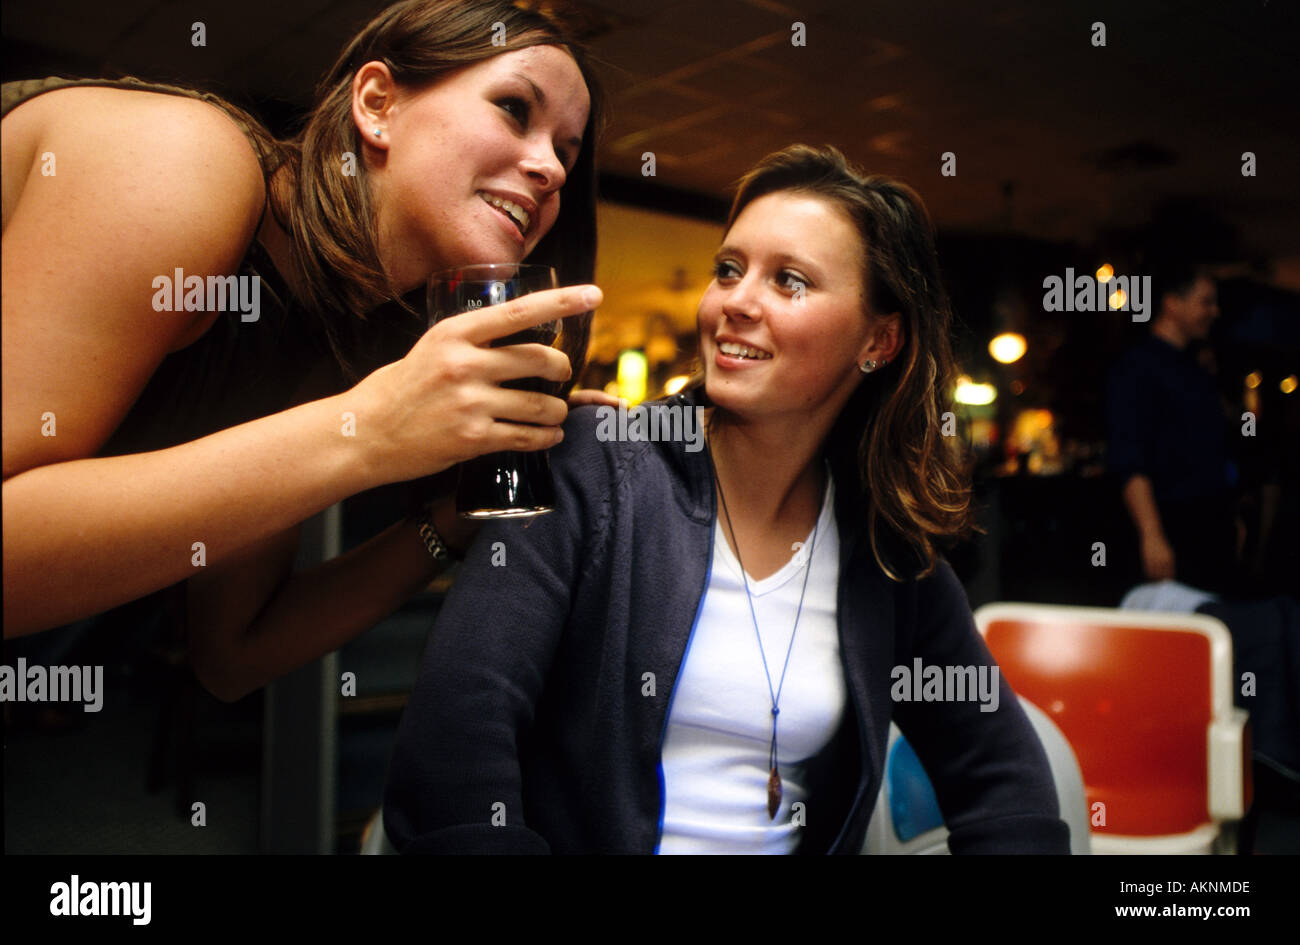 Germany Free time Young persons bowling portrait of two young women  Stock Photo